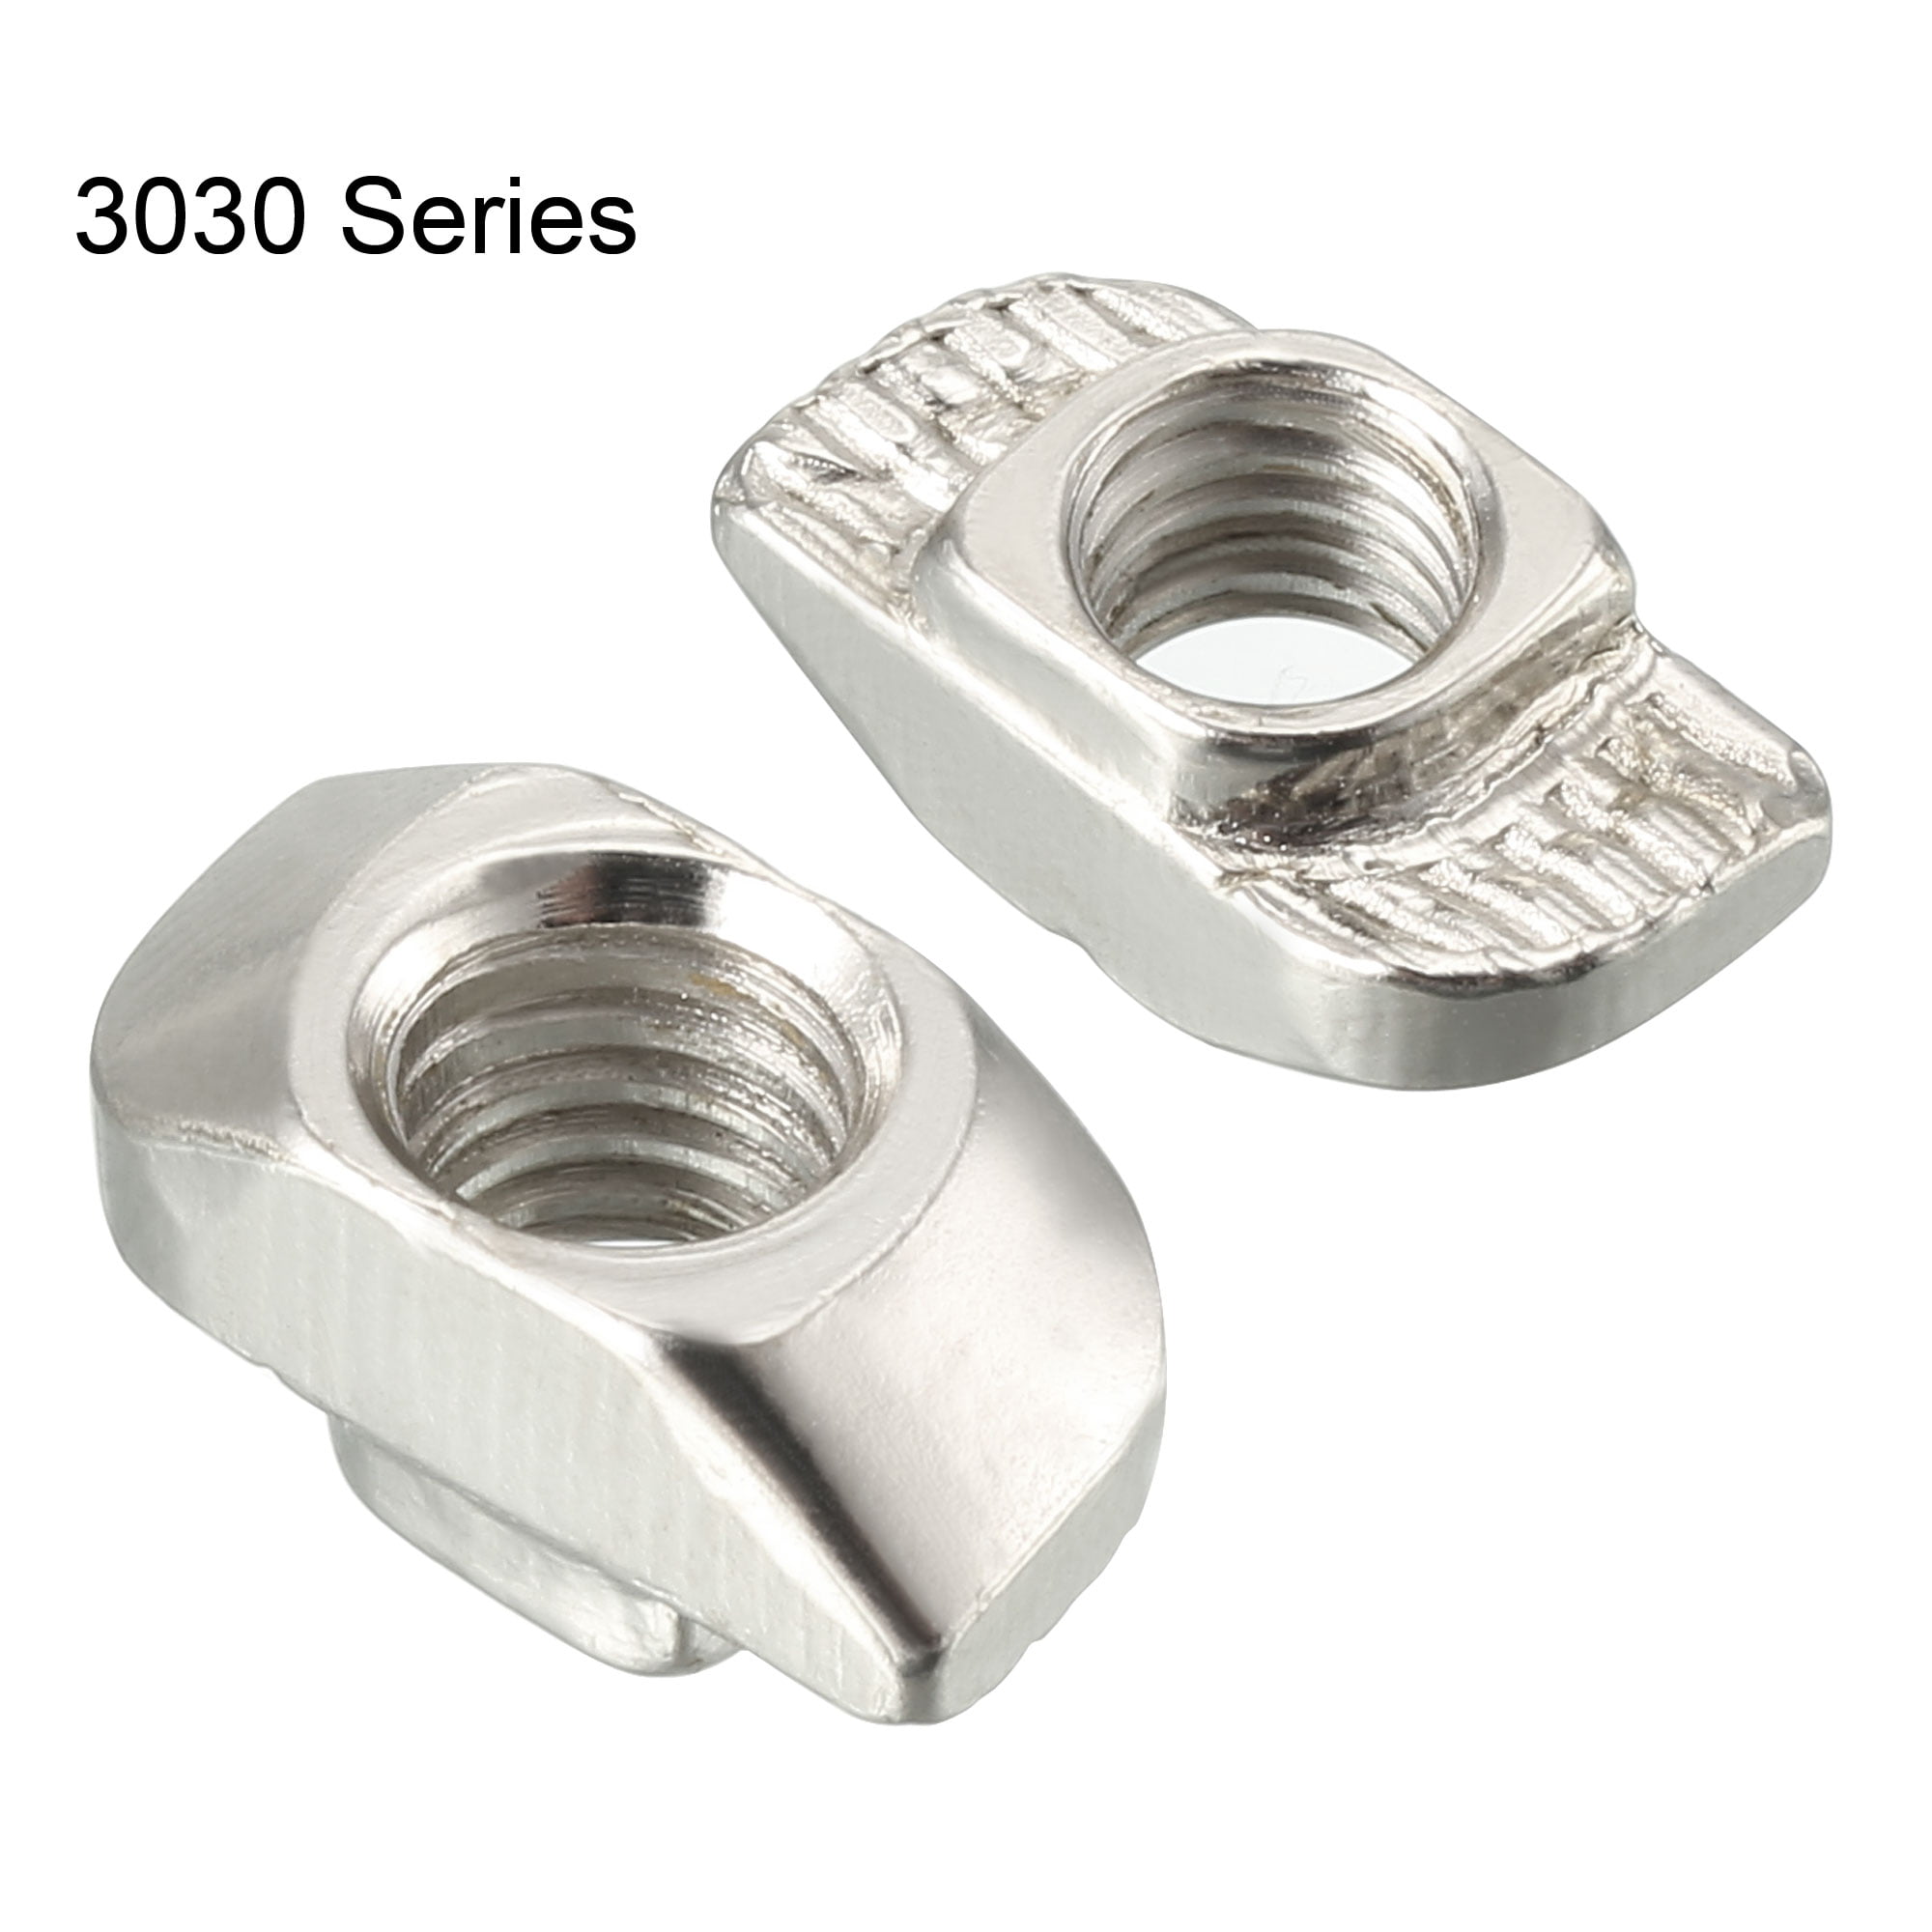 BokWin 50Pcs 3030 Series M6 T-Nuts Carbon Steel Nickel-Plated Half Round Roll in Sliding T Slot Nut 8mm Slot Aluminum Profile Accessories 